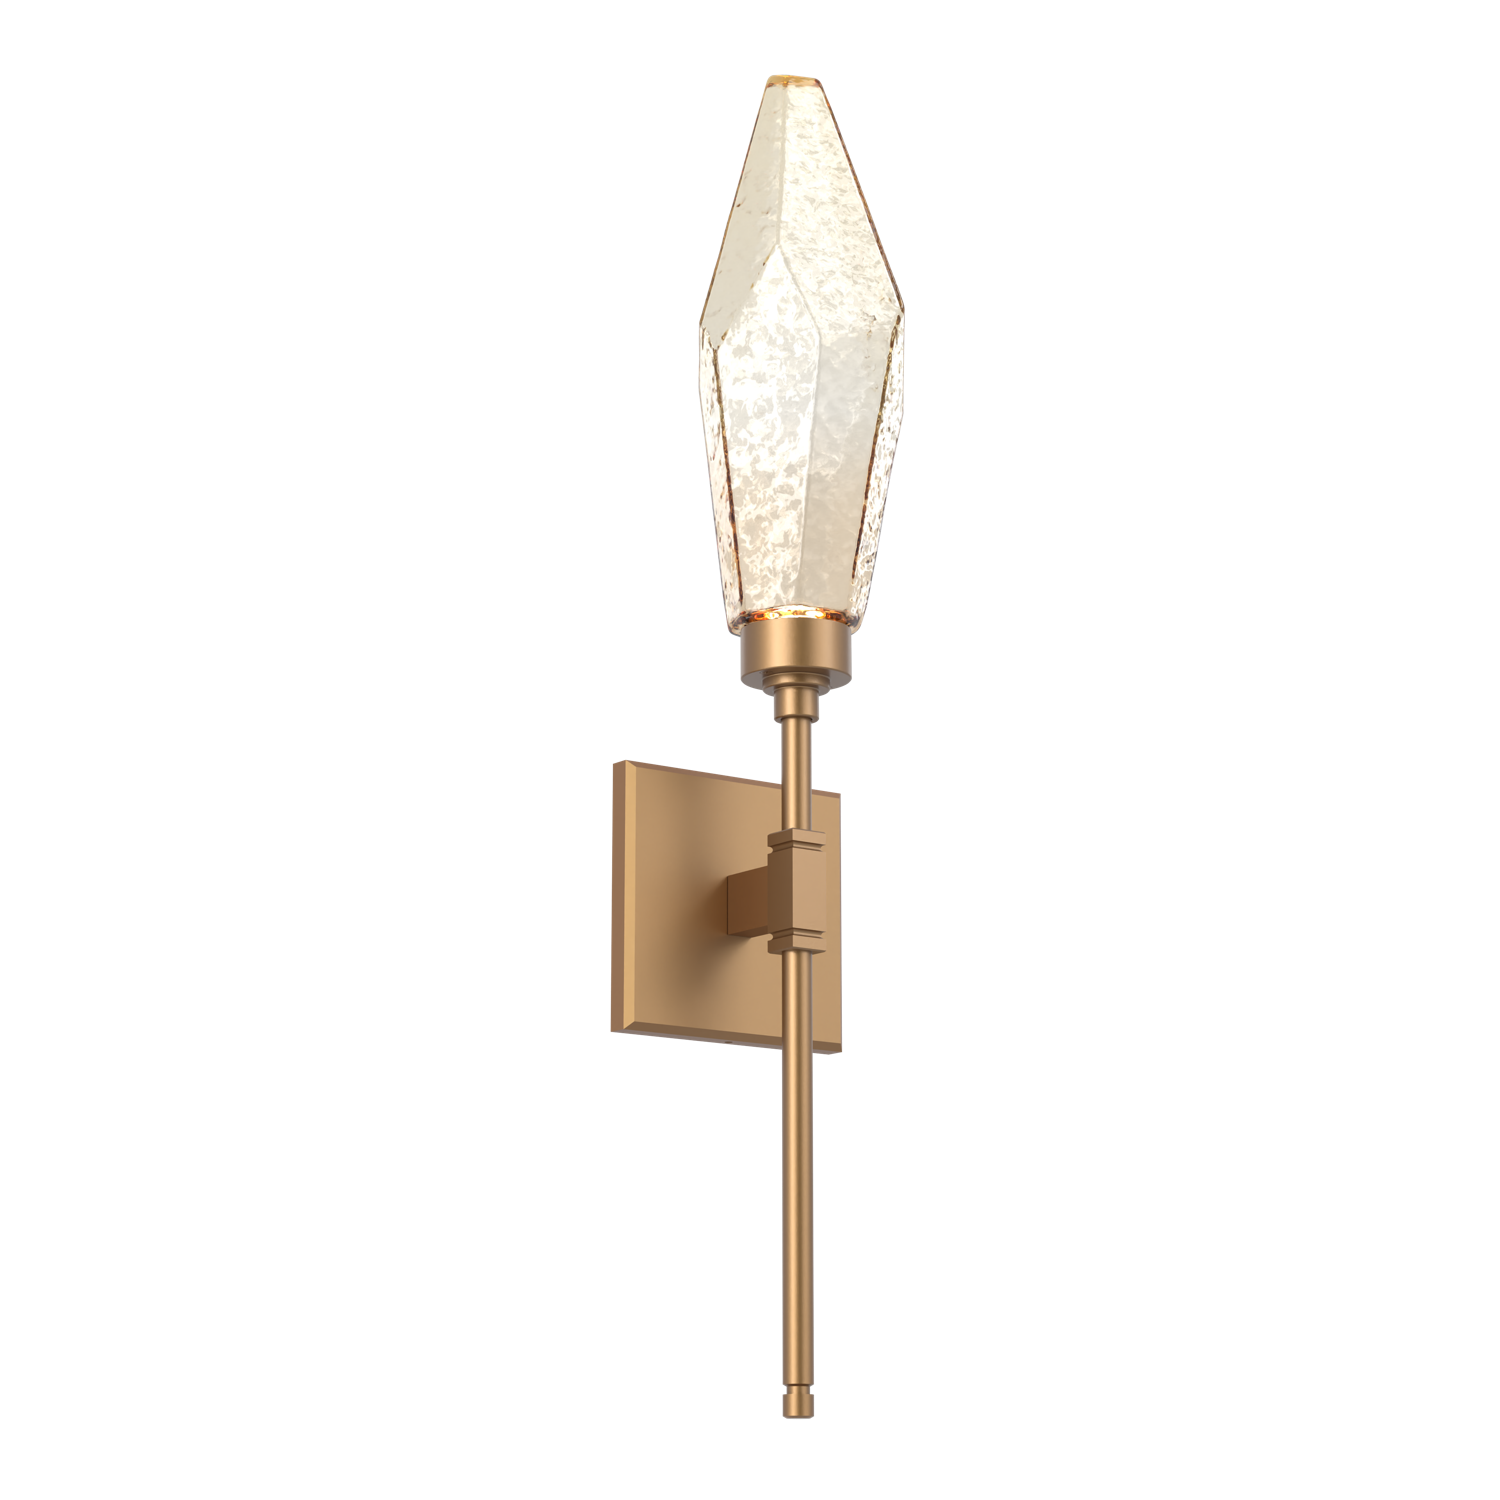 IDB0050-04-NB-CA-Hammerton-Studio-Rock-Crystal-ada-certified-belvedere-wall-sconce-with-novel-brass-finish-and-chilled-amber-blown-glass-shades-and-LED-lamping